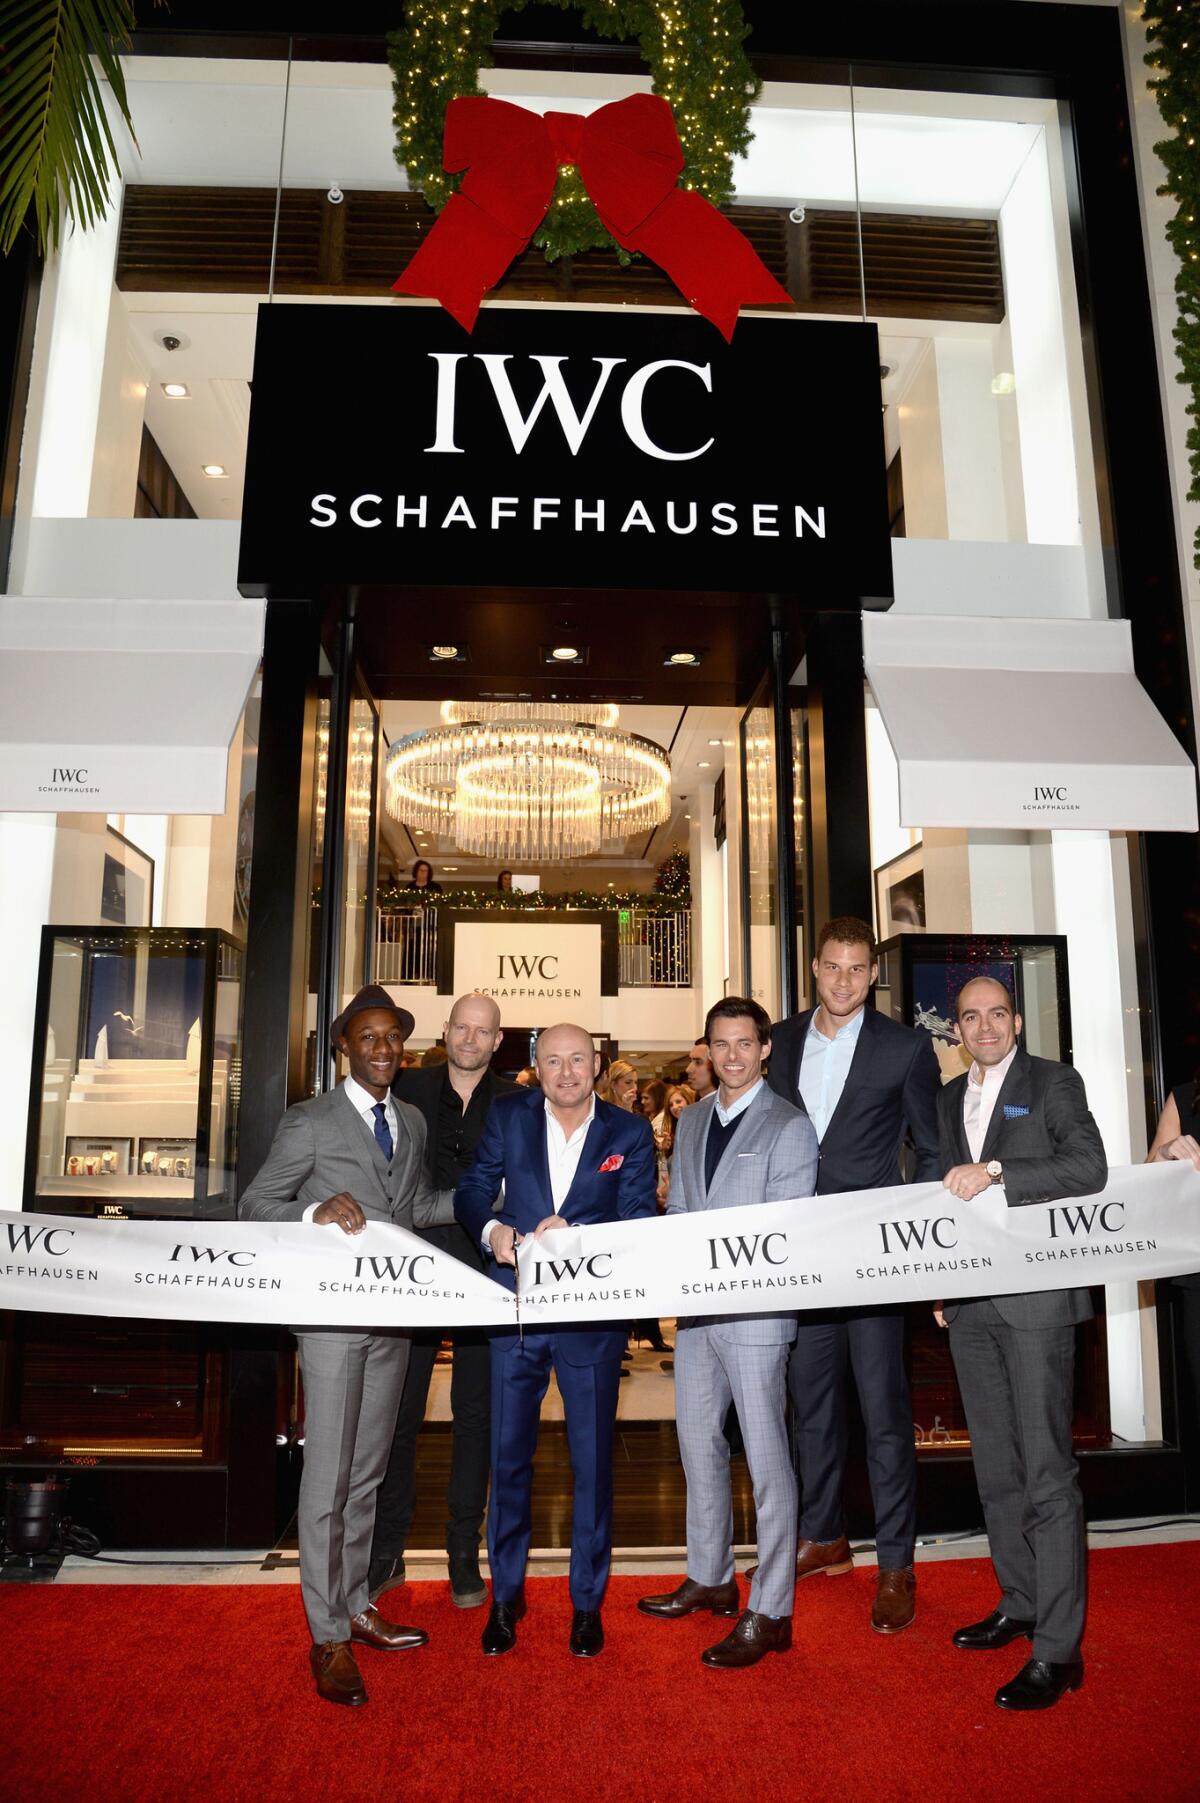 From left, recording artist Aloe Blacc, IWC Schaffhausen CEO Georges Kern, actor James Marsden, Clippers star Blake Griffin and brand president Edouard D'Arbaumont cut the ribbon at the IWC Schaffhausen Rodeo Drive flagship on Dec. 1, 2015.